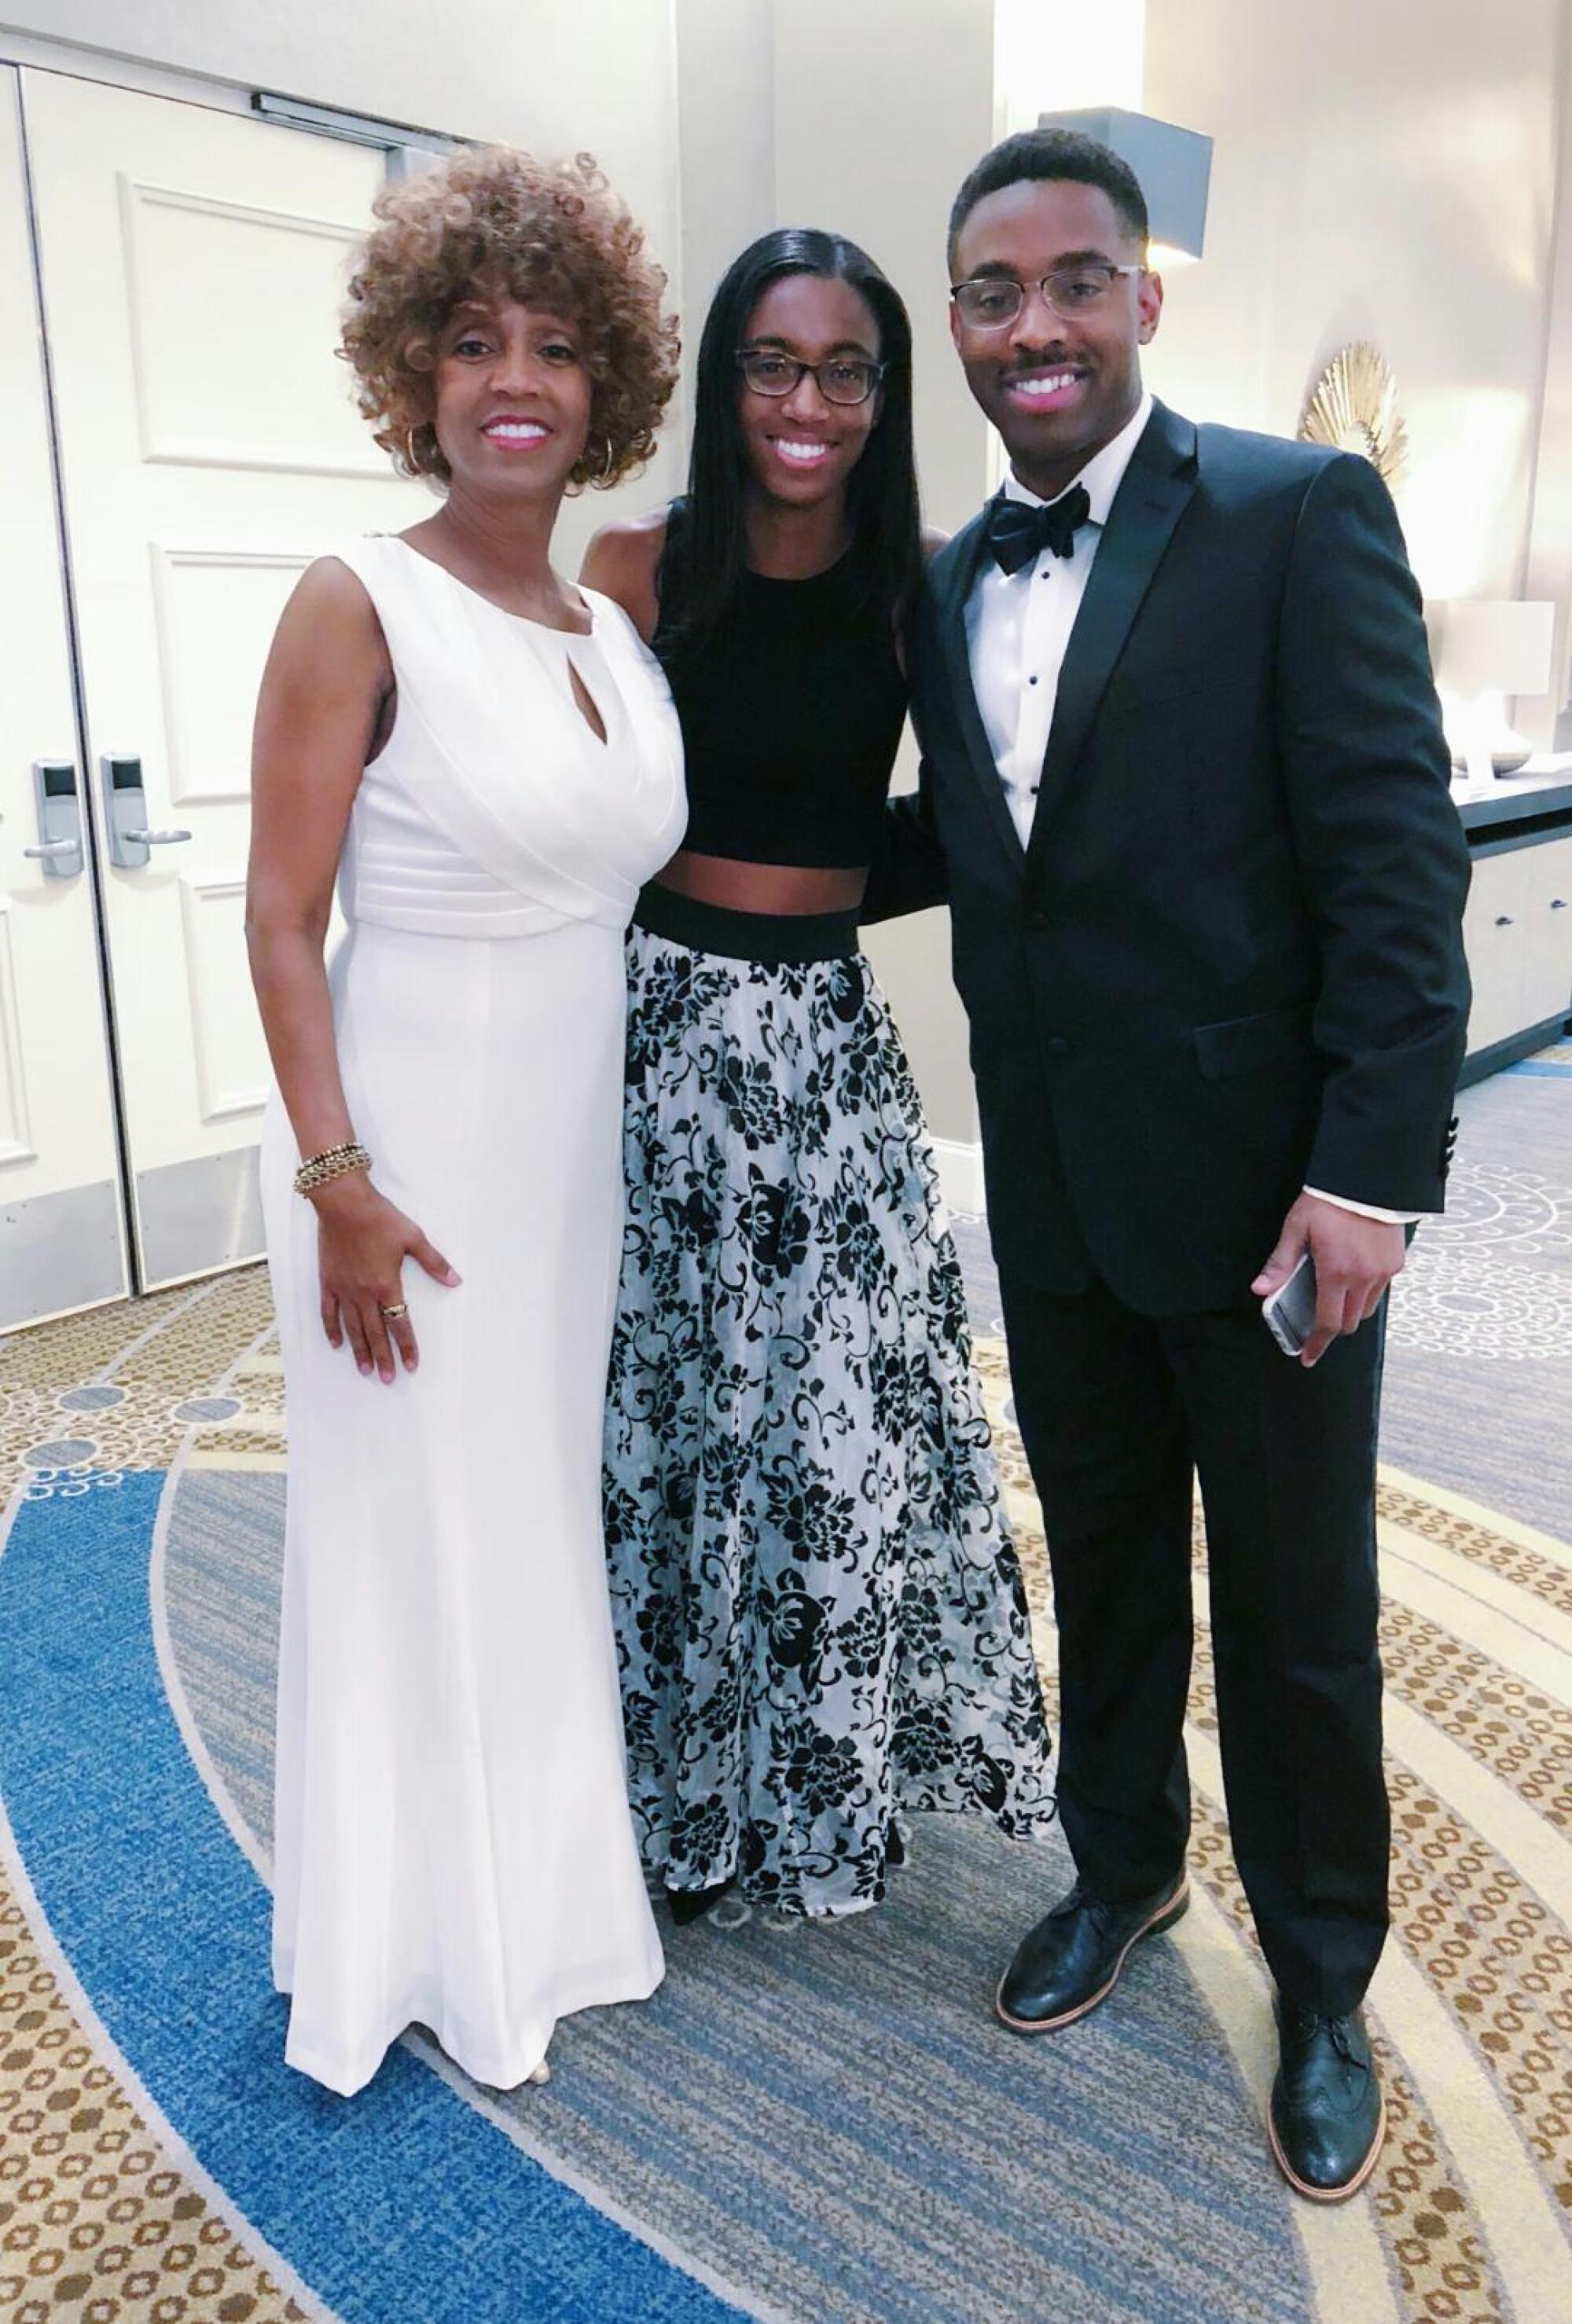 Stanley Wilson Jr., right, with his mother, Pulane Lucas, left, and sister Fredericka at a black and white gala.